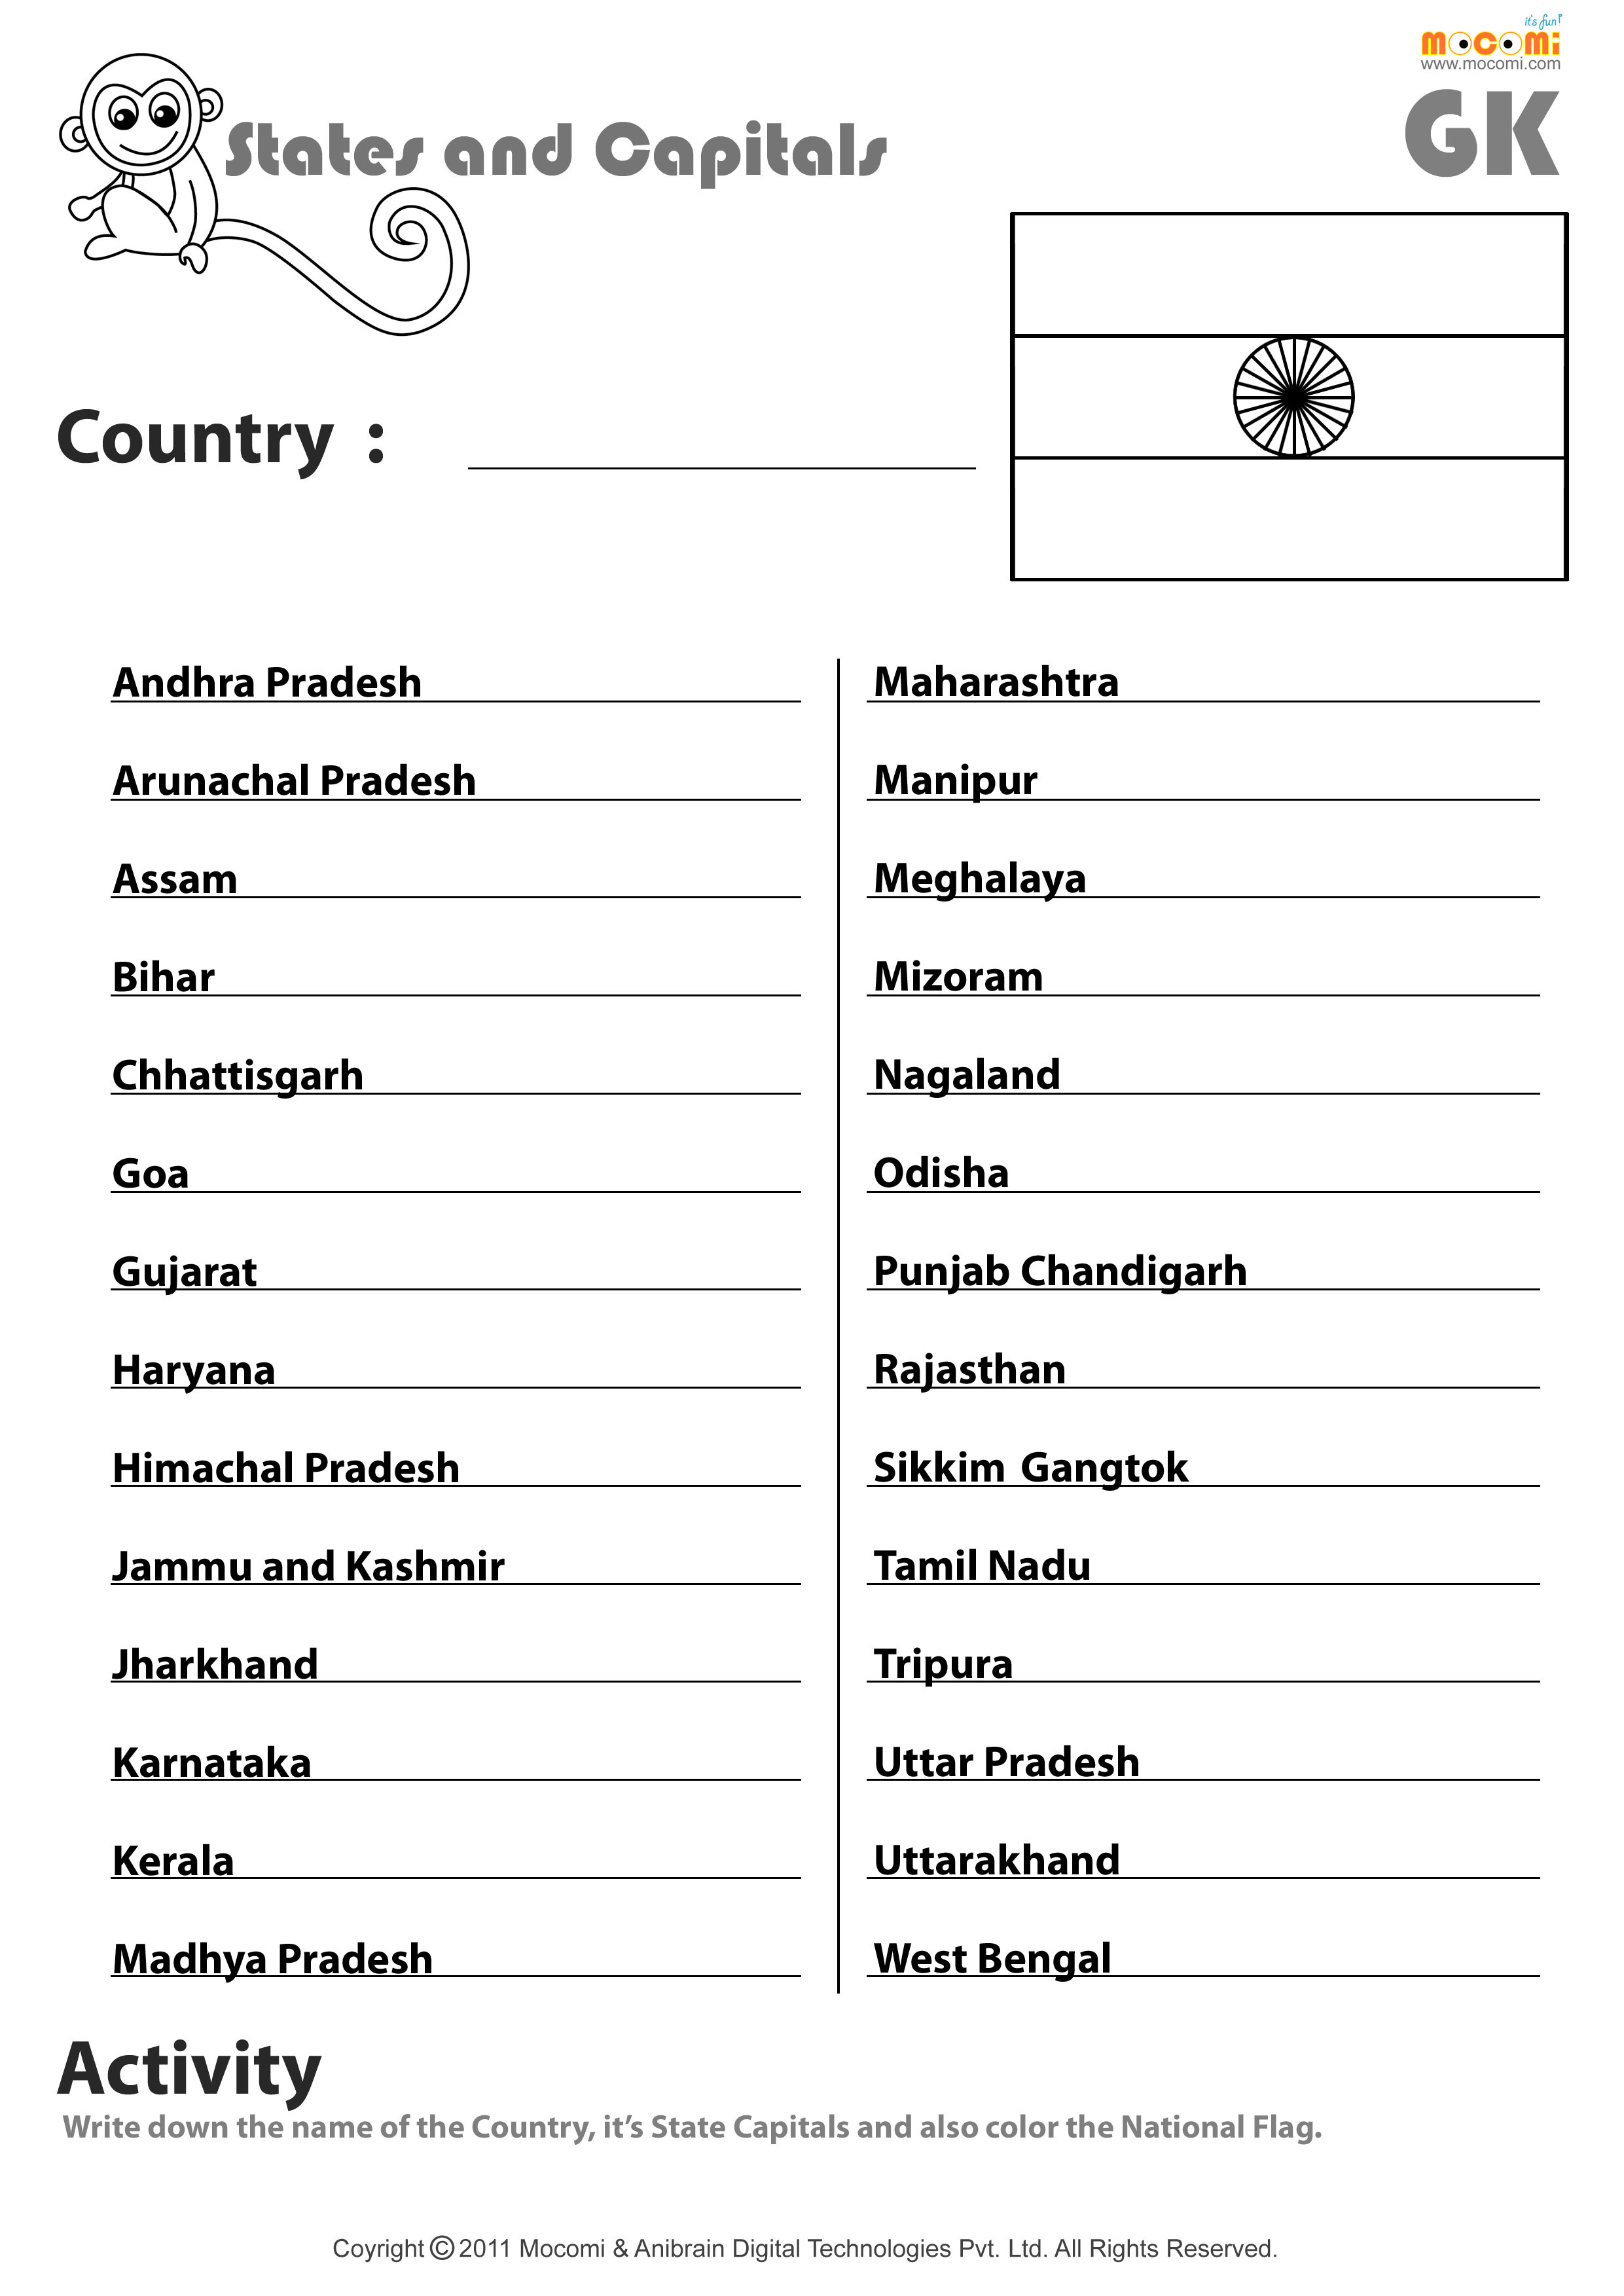 Indian States And Their Capitals - English Worksheets For Kids | Mocomi - Free Printable States And Capitals Worksheets